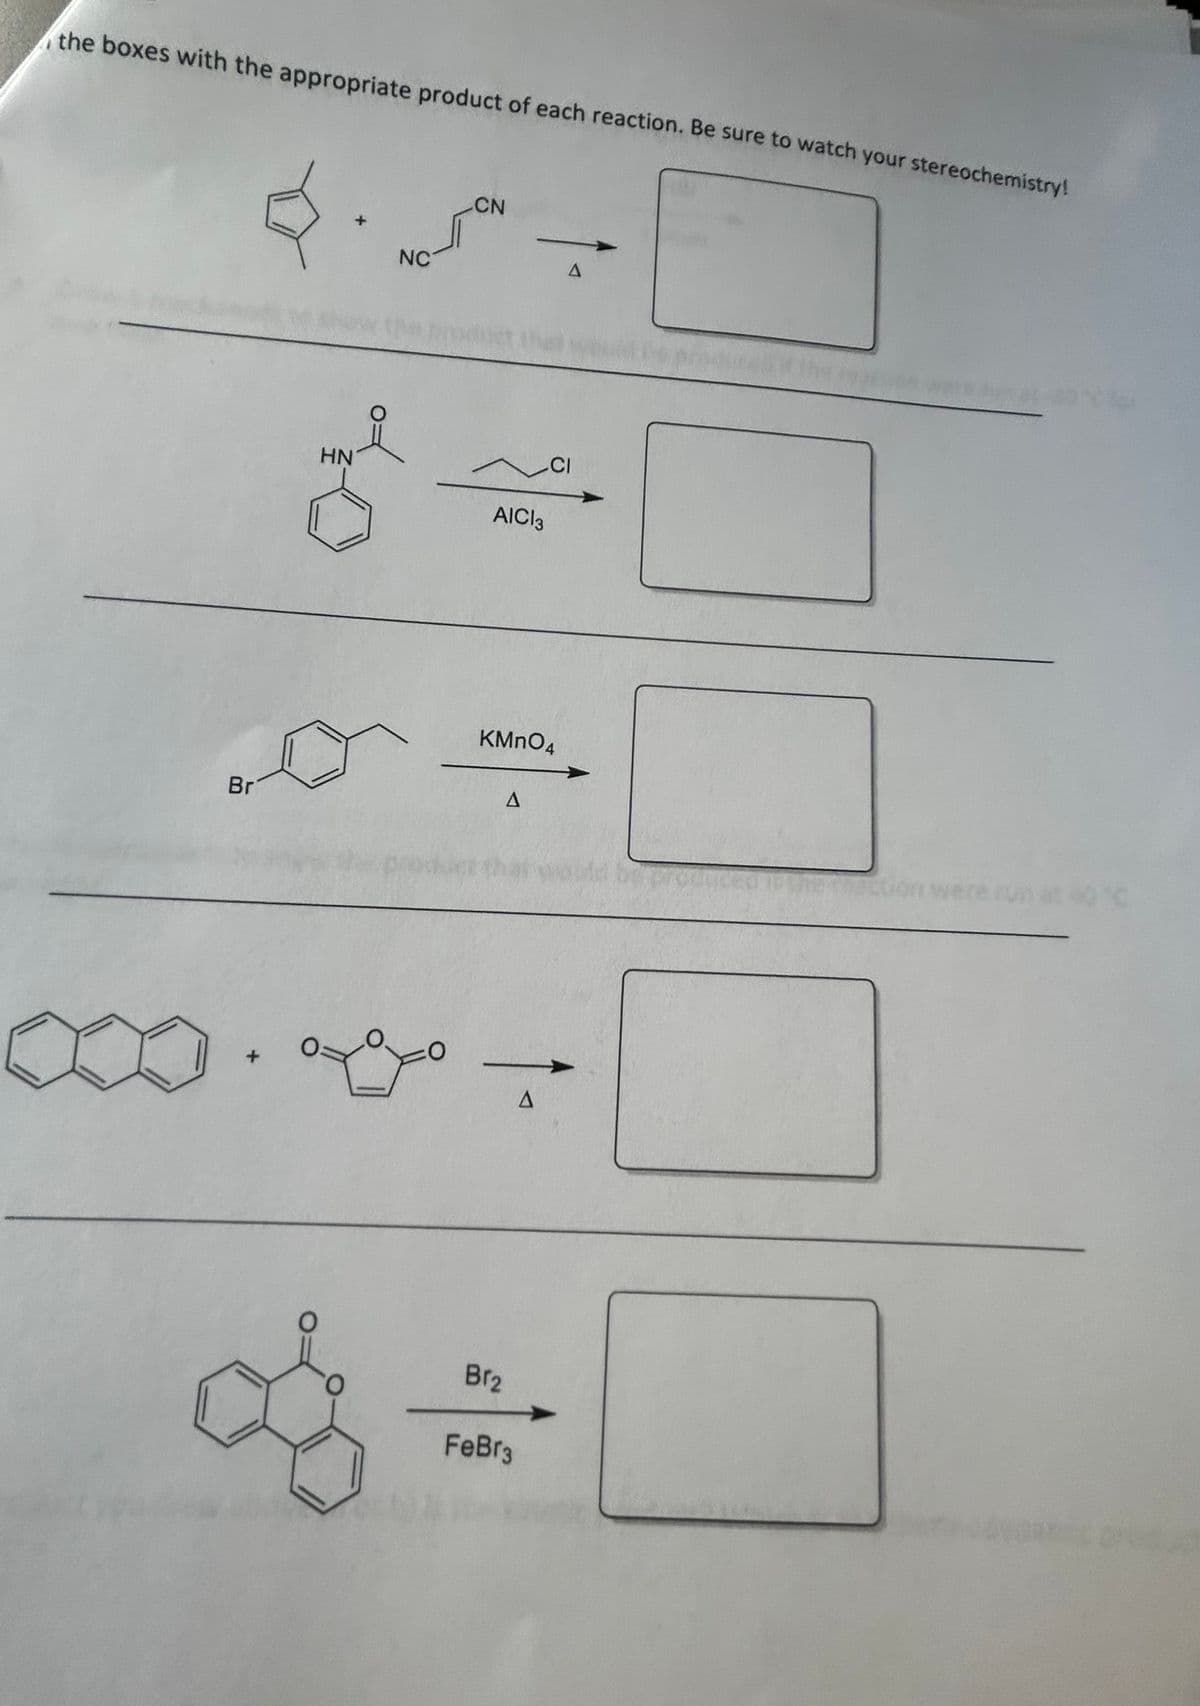 the boxes with the appropriate product of each reaction. Be sure to watch your stereochemistry!
Br
S
HN
NC
CN
^
AICI 3
KMnO4
A
Br₂
FeBr3
A
A
CI